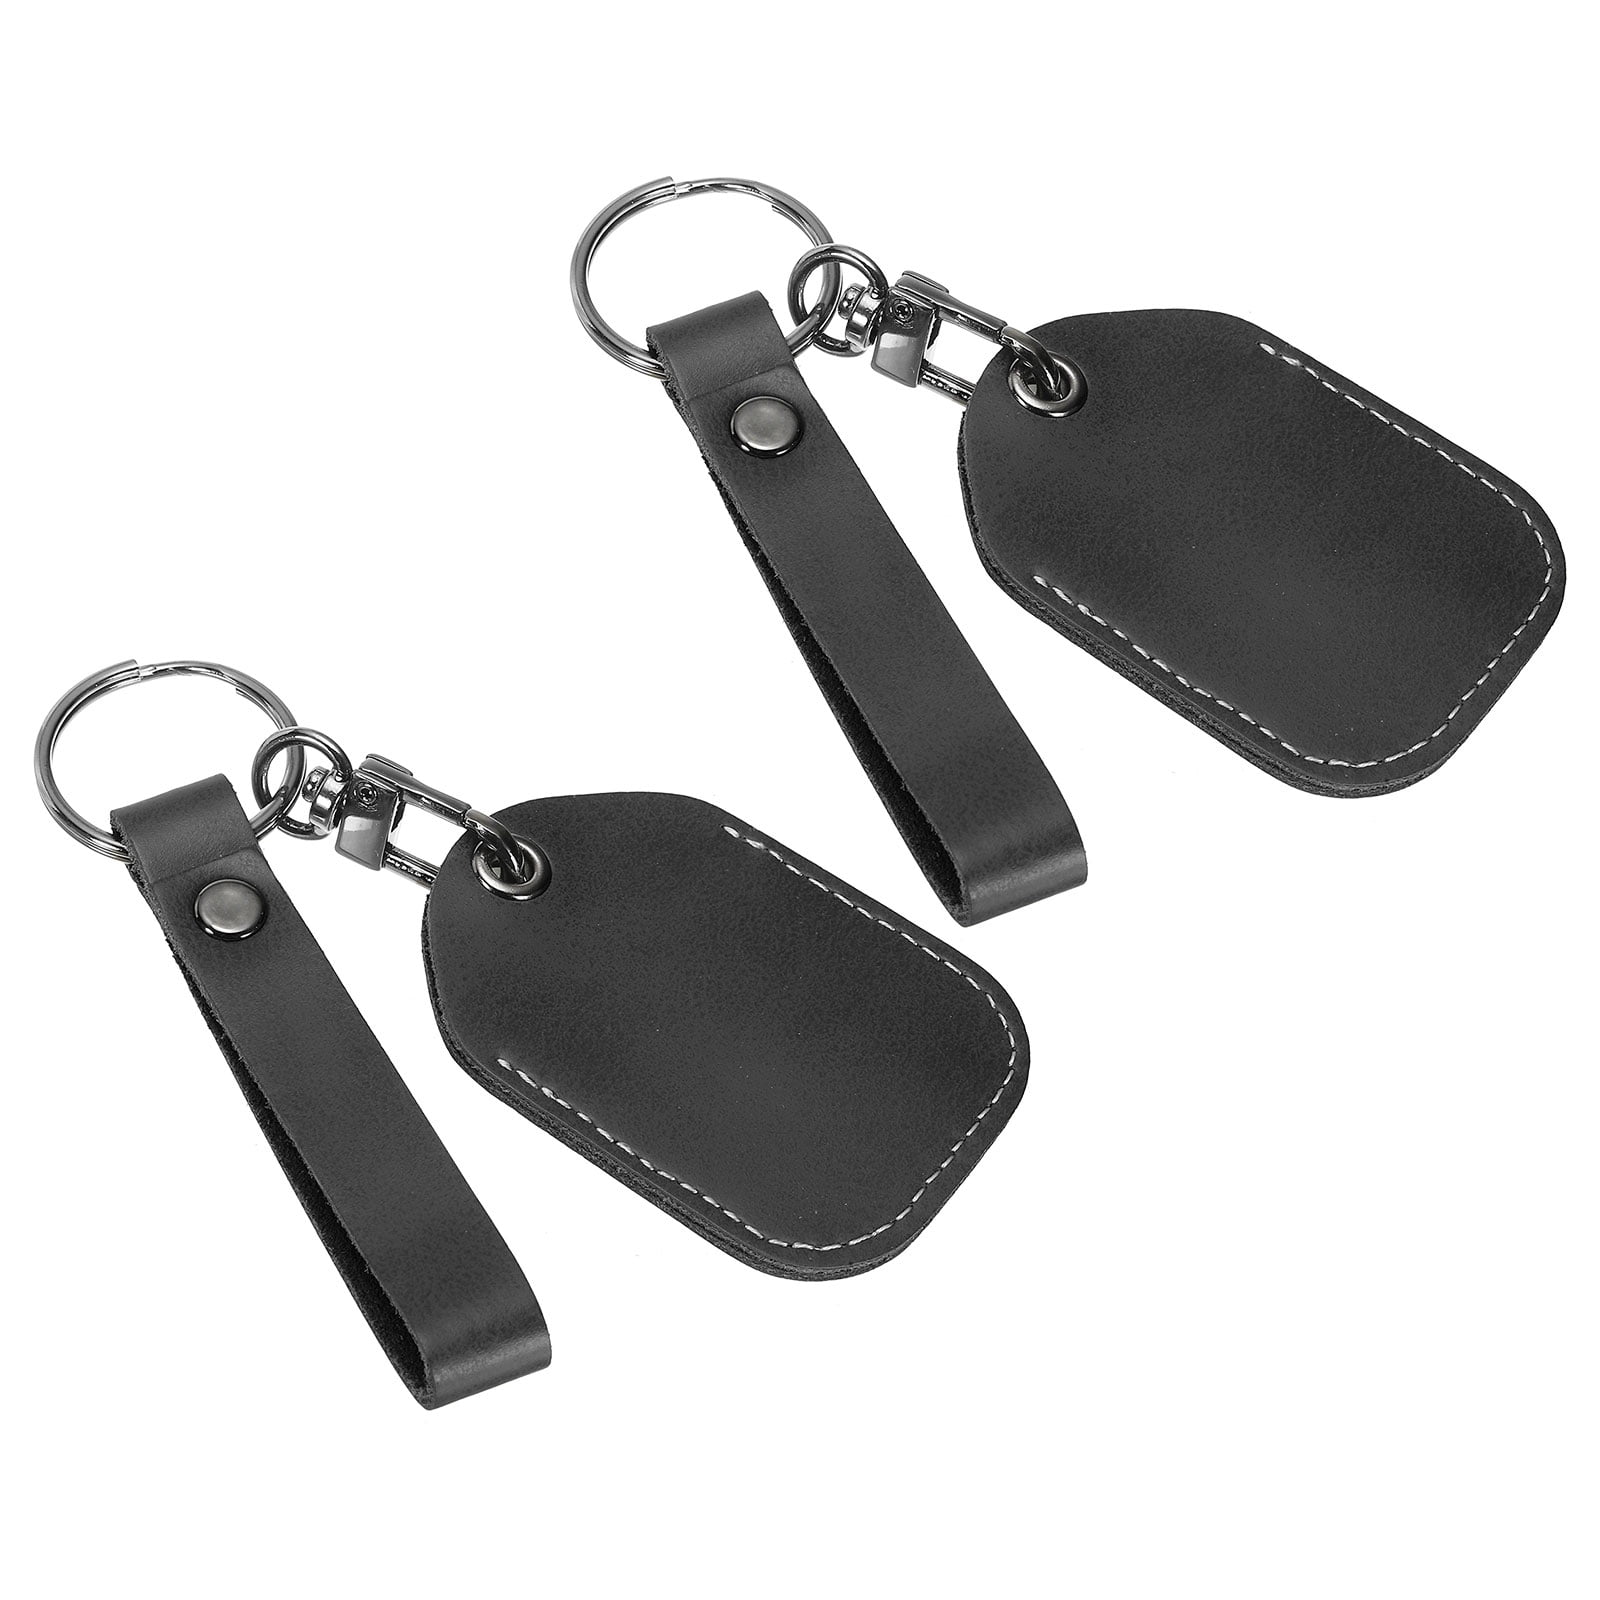 Key Fob Hardware with Key Rings Sets - 1 Inch (25 mm) (Nickel) 